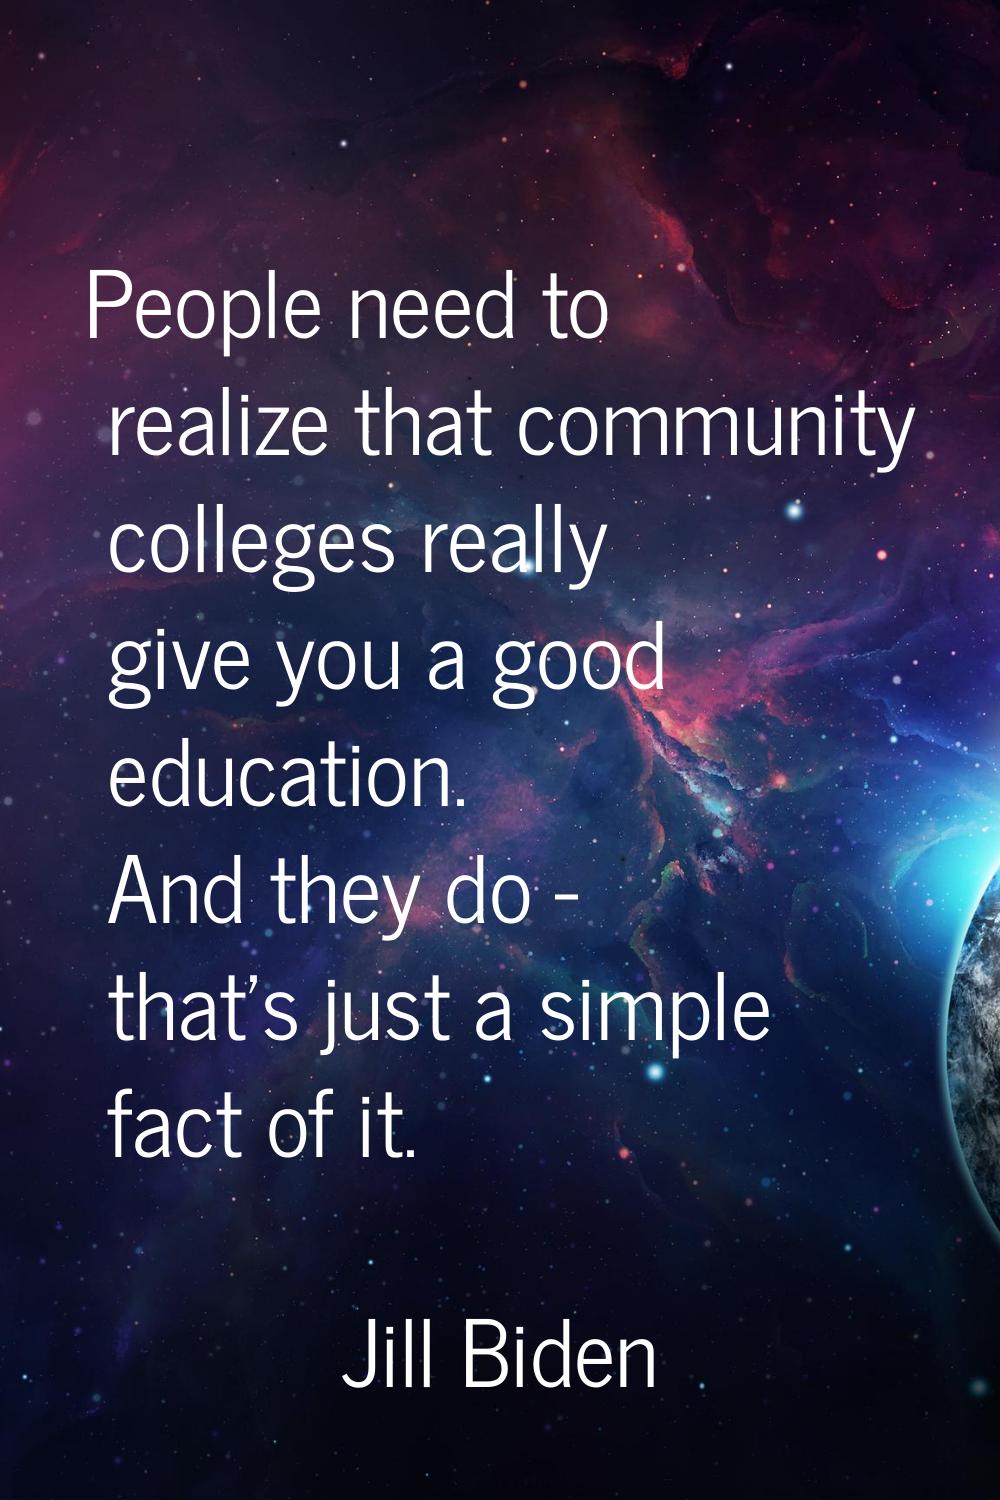 People need to realize that community colleges really give you a good education. And they do - that